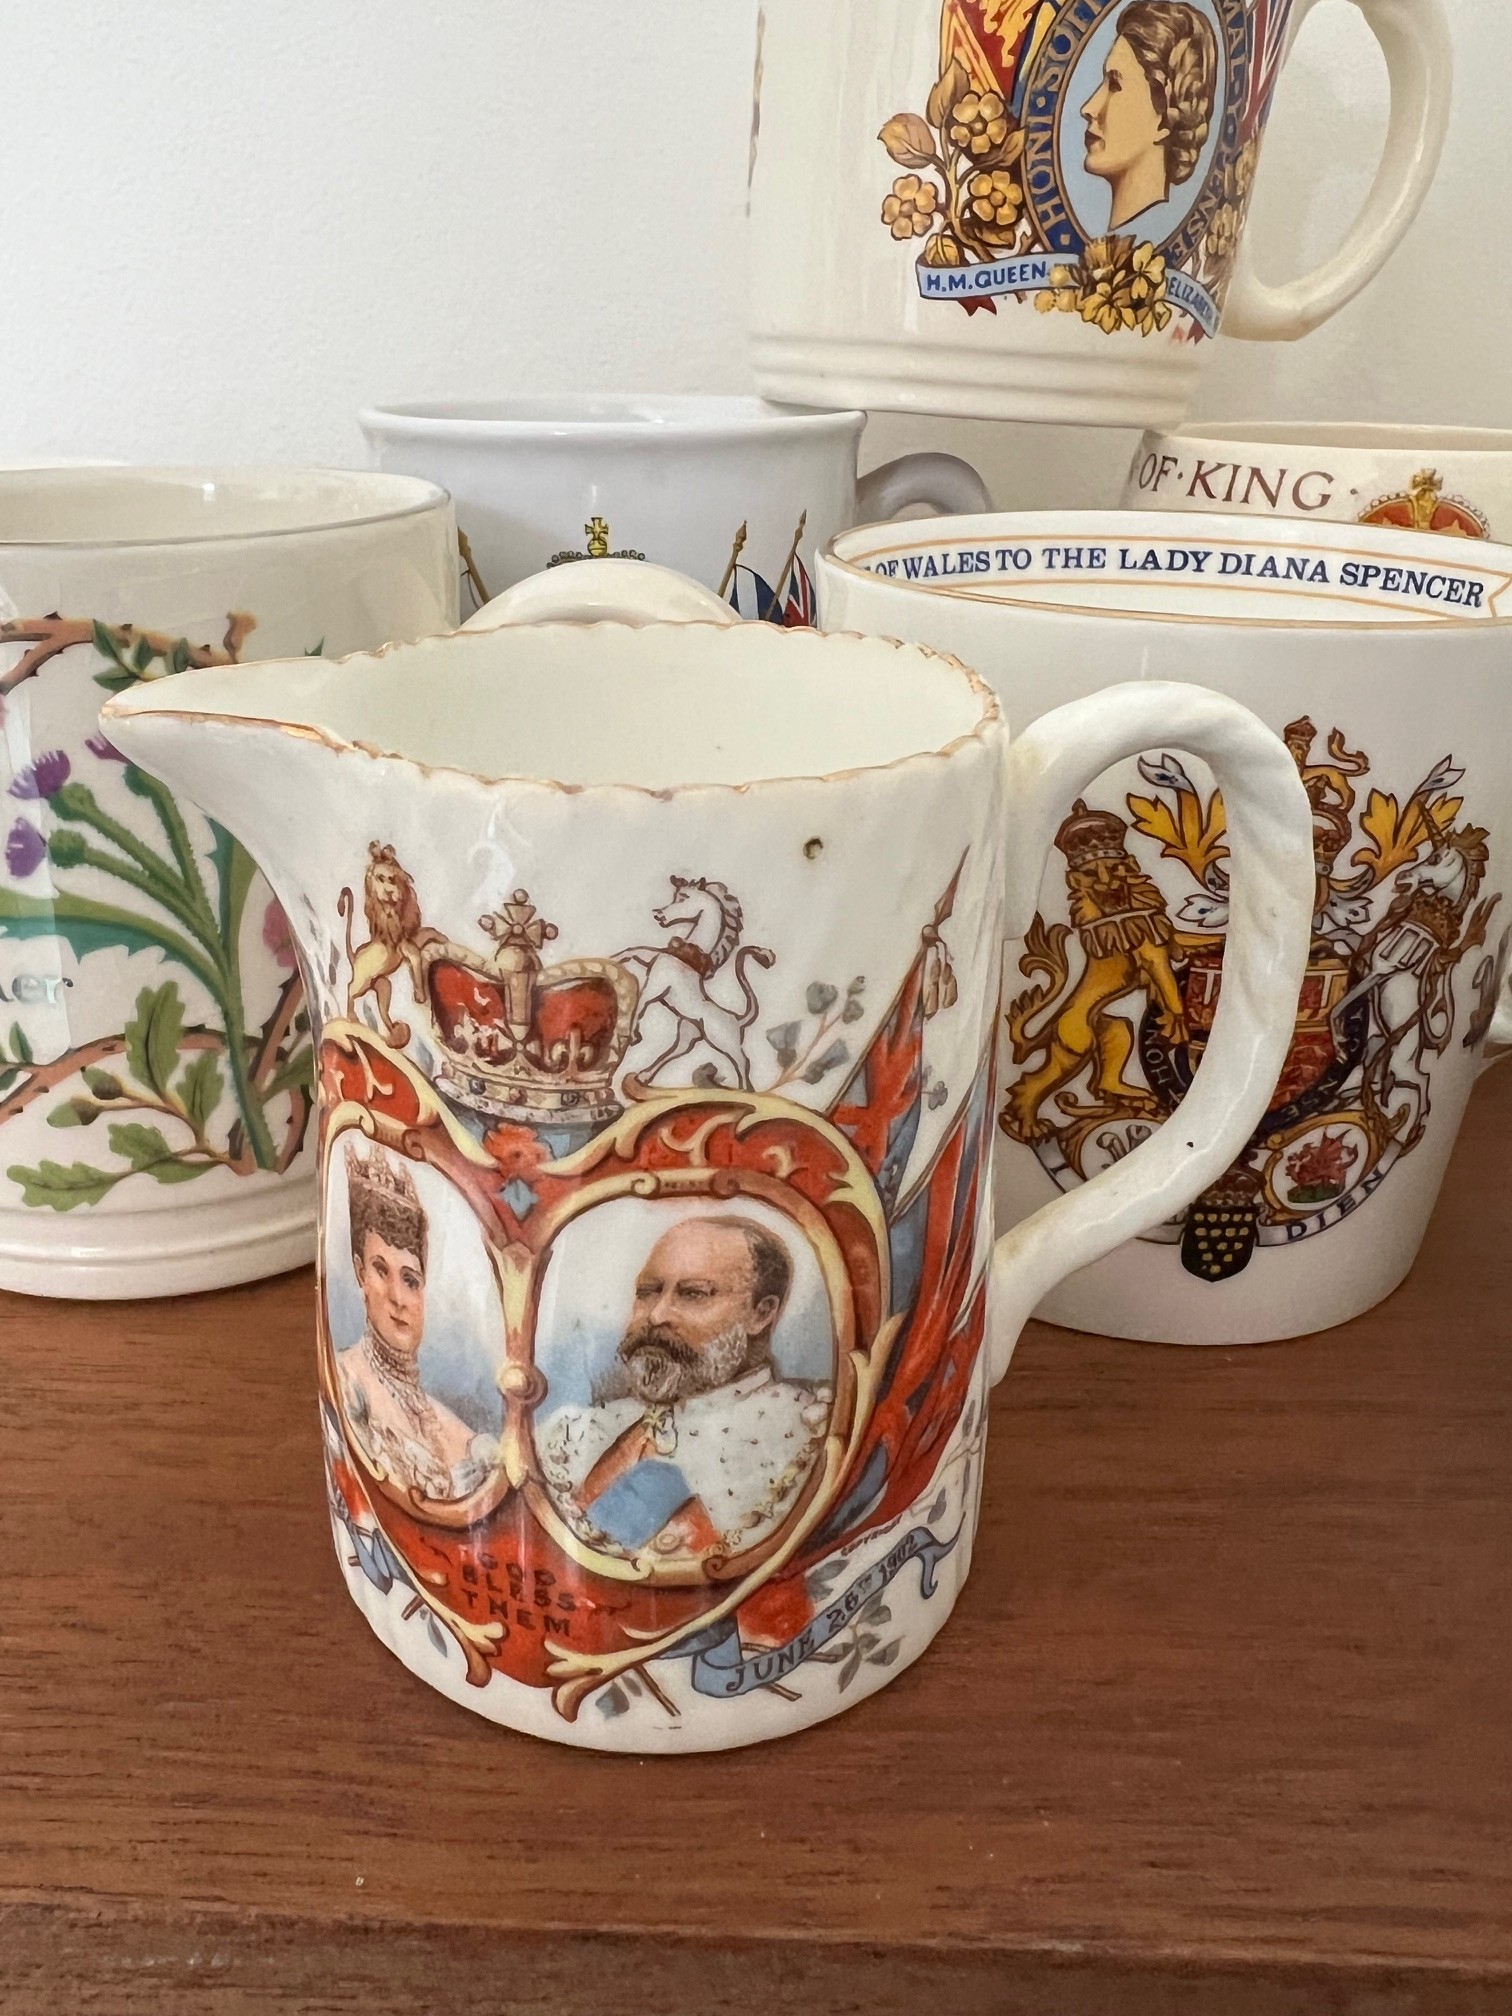 COLLECTION OF ROYAL MEMORABILIA, EDWARDIAN CREAM JUG AND EARLY VICTORIAN SMALL POTTERY TANKARD, - Image 5 of 5